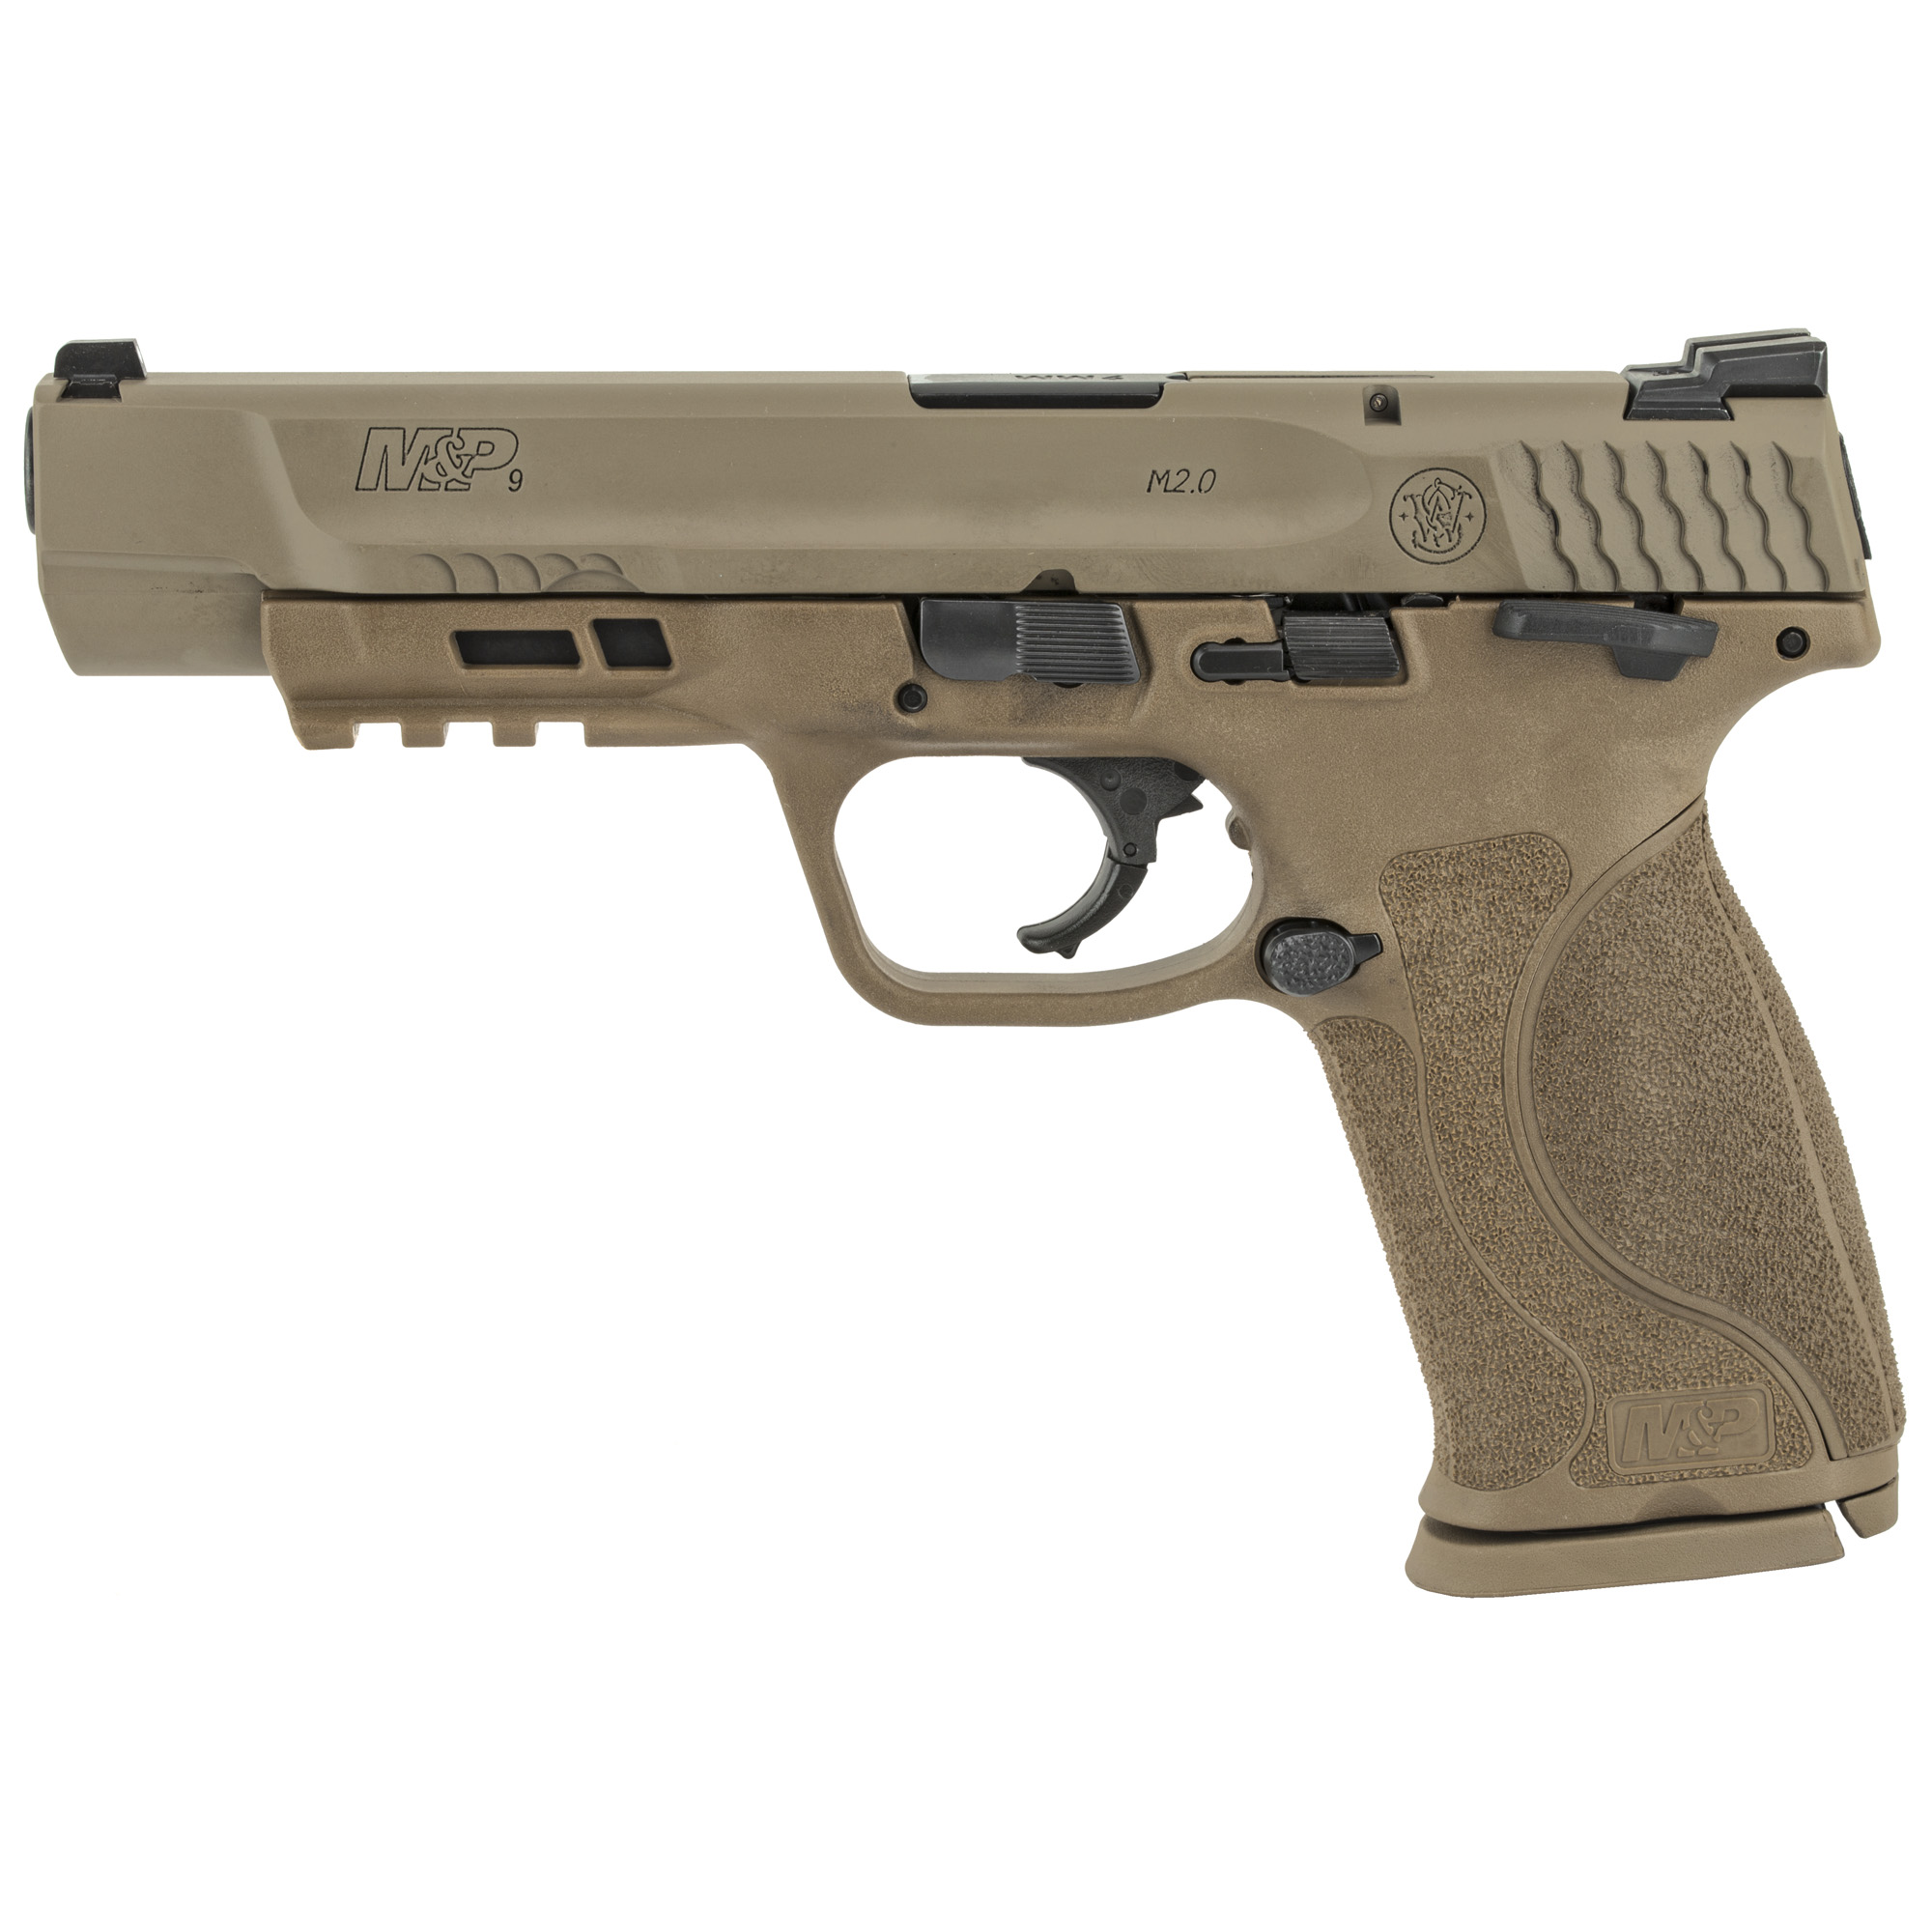 Smith & Wesson, M&P 2.0, Striker Fired, Semi-automatic, Polymer Frame Pistol, Full Size, 9MM, 5" Barrel, Armornite Finish, Flat Dark Earth, 3 Dot Sights, Manual Thumb Safety, 17 Rounds, 2 Magazines